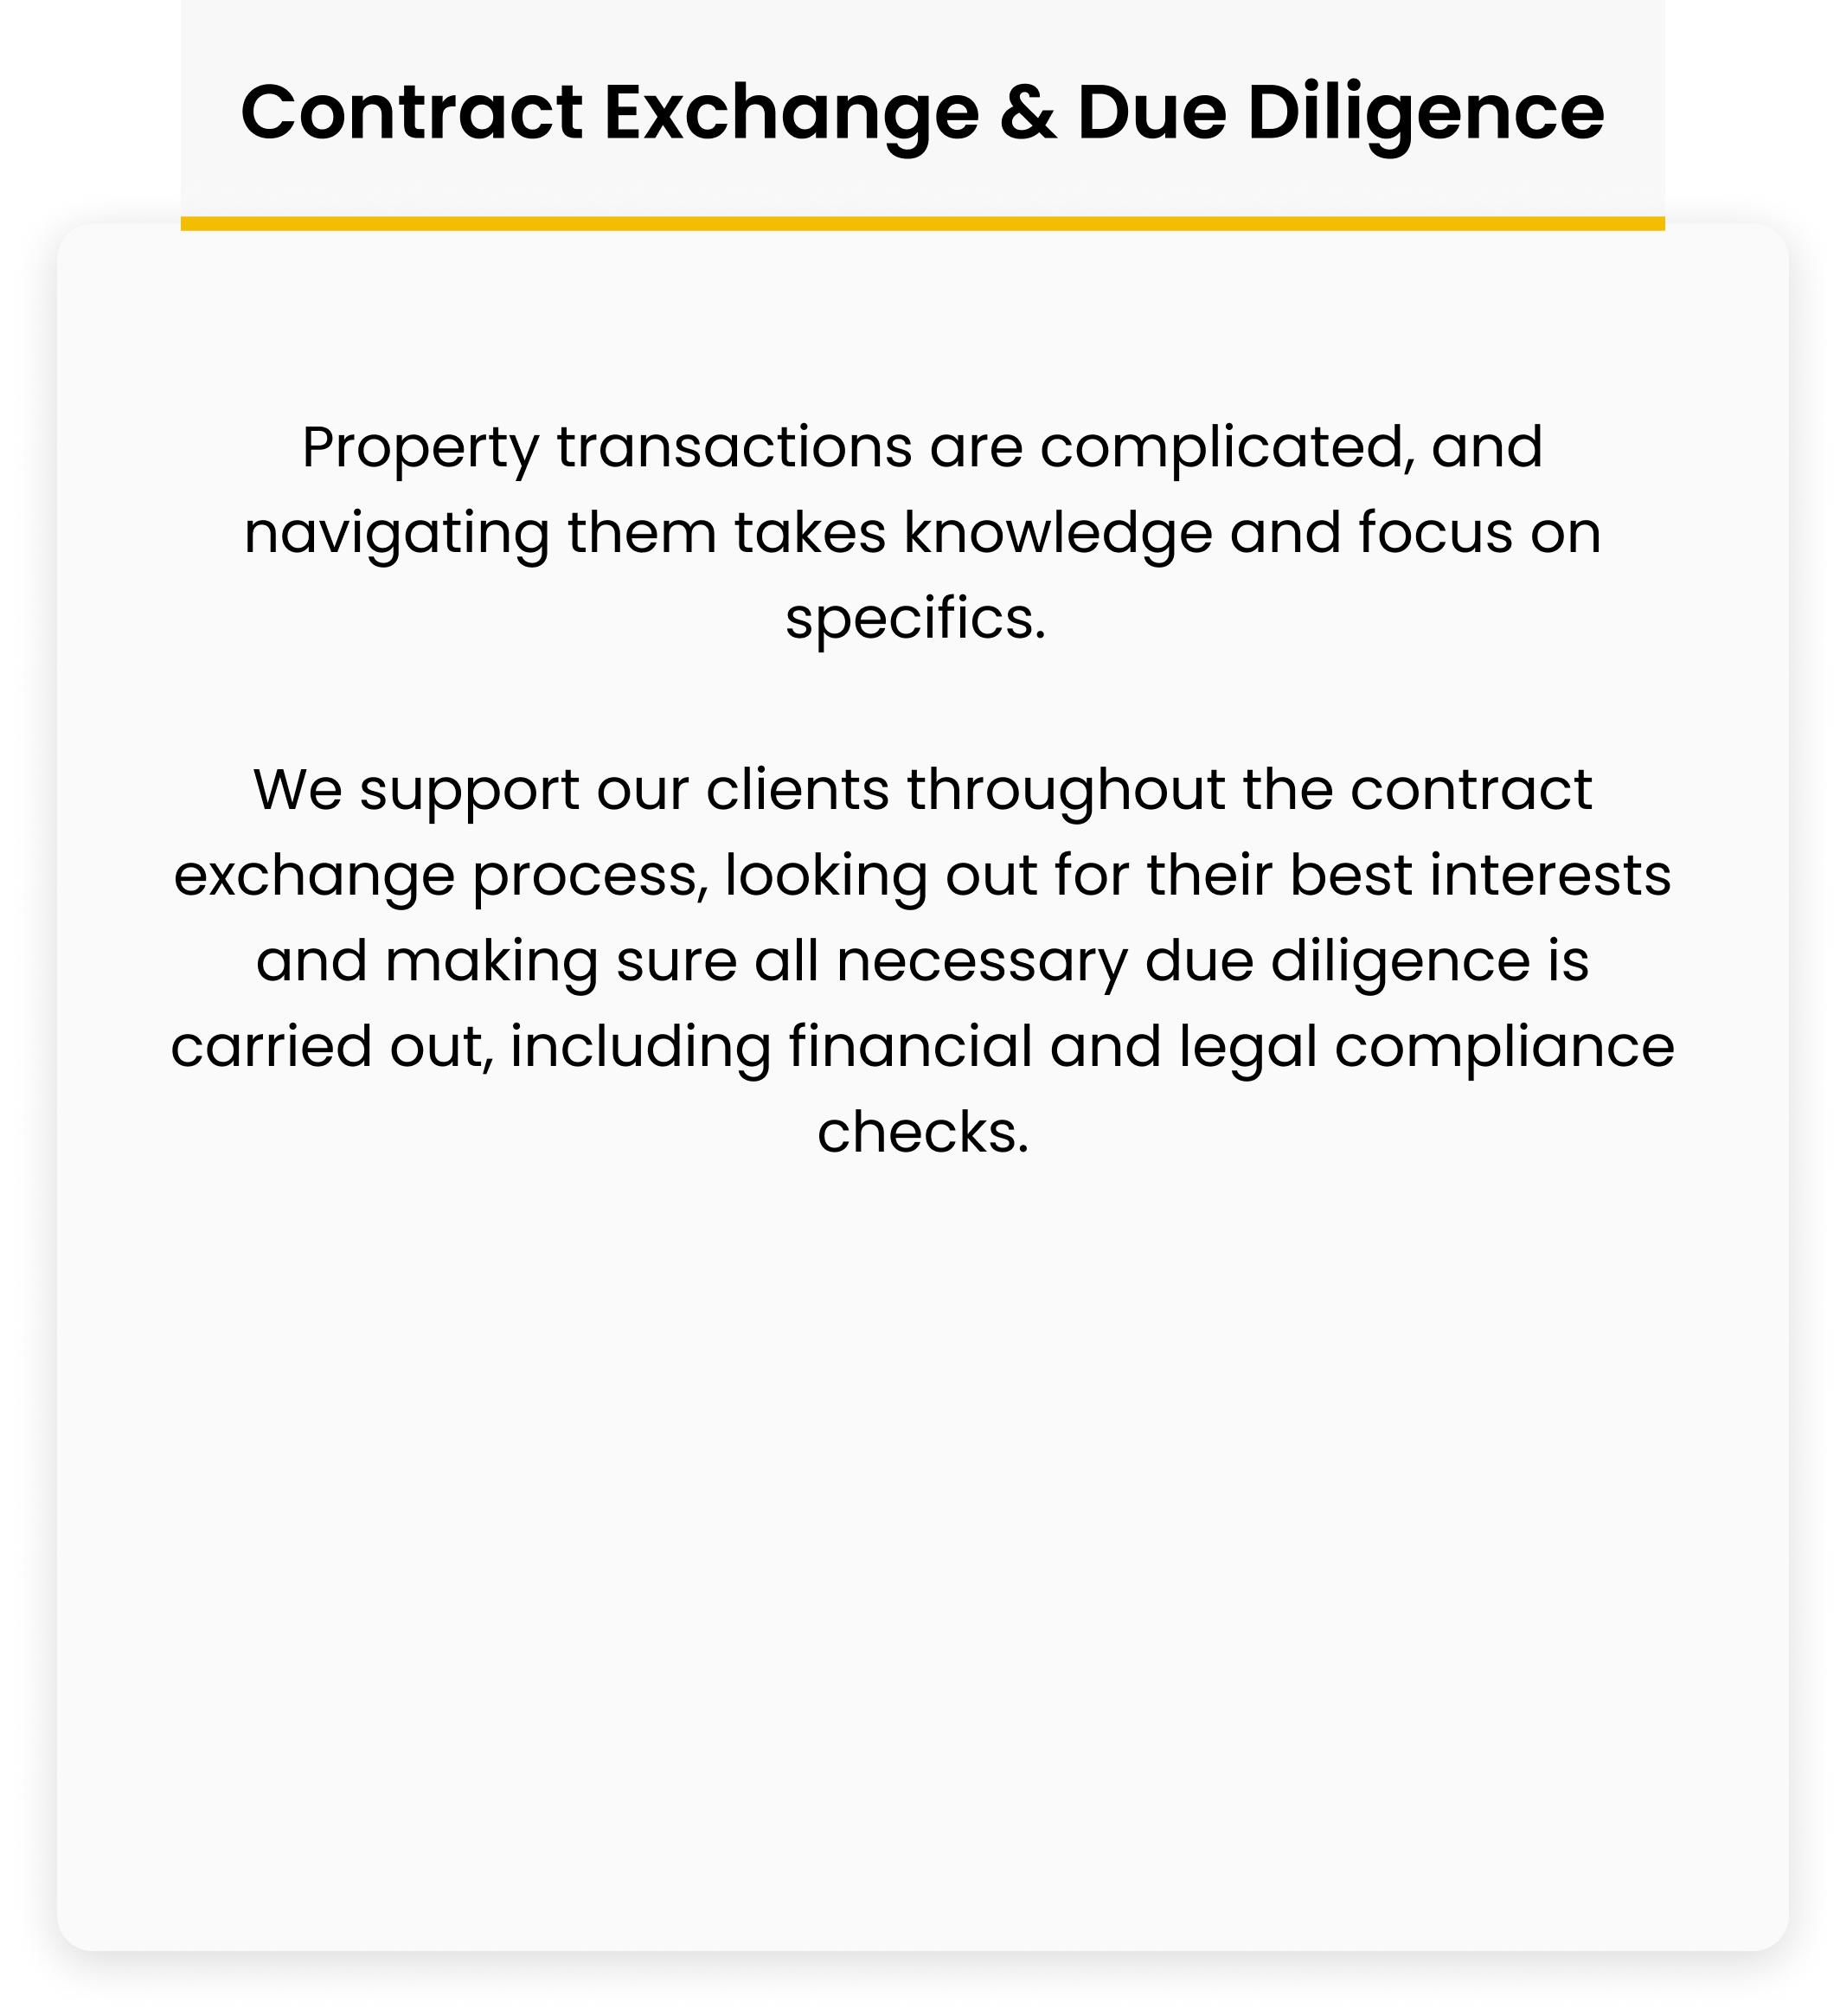 Contract Exchange & Due Diligence